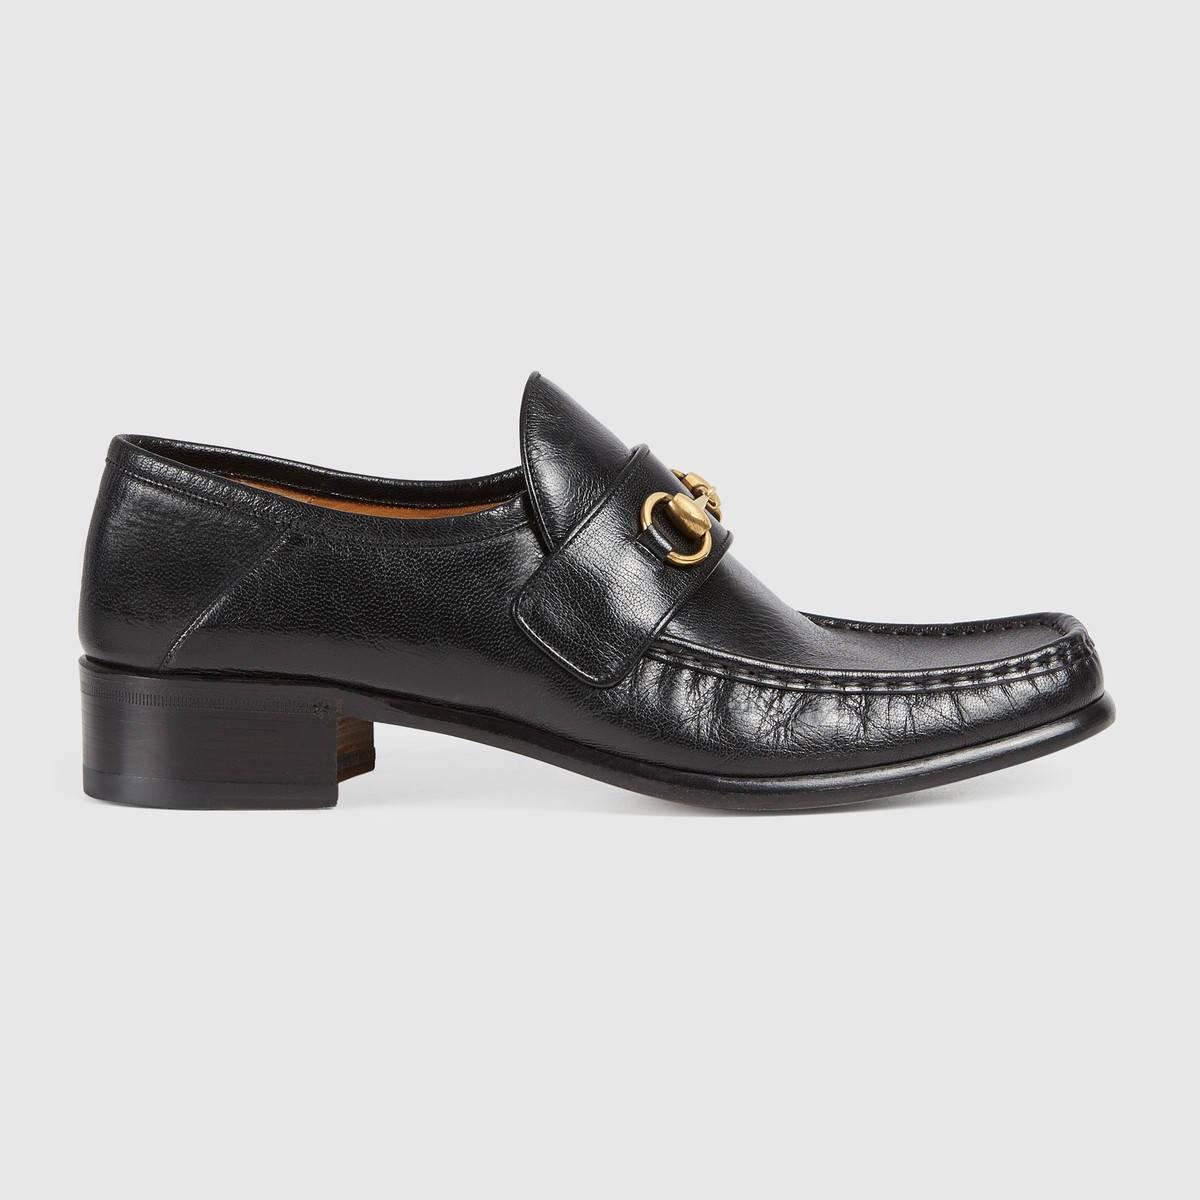 Gucci Horsebit Leather Loafer - Black Leather | ModeSens